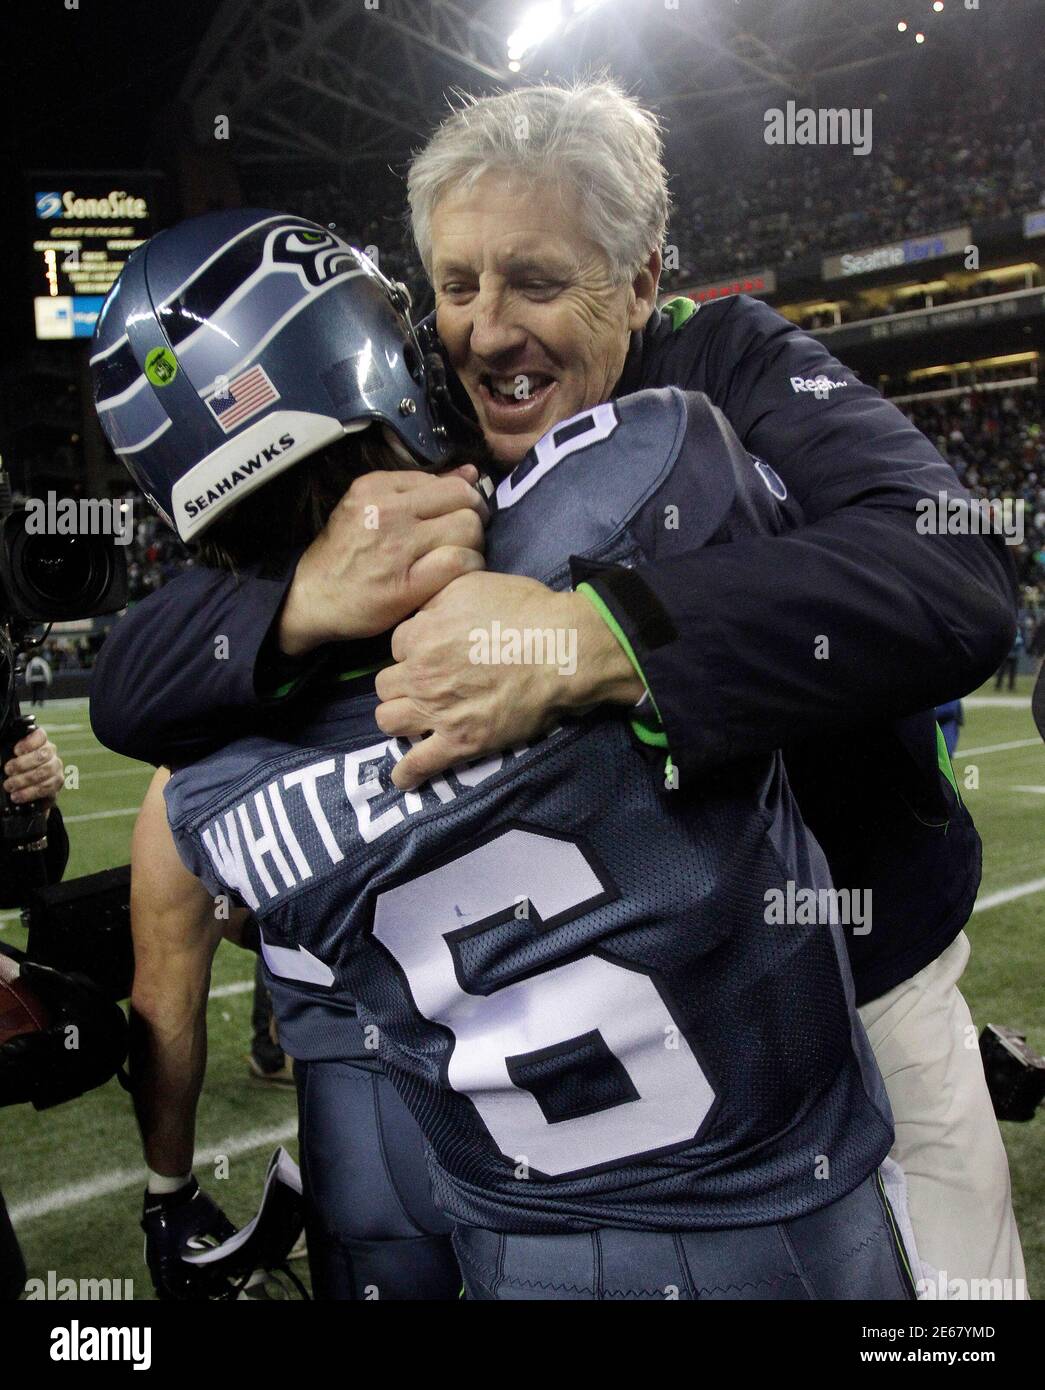 Seattle Seahawks head coach Pete Carroll congratulates quarterback Charlie Whitehurst after the team's win over the St Louis Rams to clinch the NFC West in Seattle, Washington, January 2, 2011. REUTERS/Robert Sorbo (UNITED STATES - Tags: SPORT FOOTBALL) Stock Photo